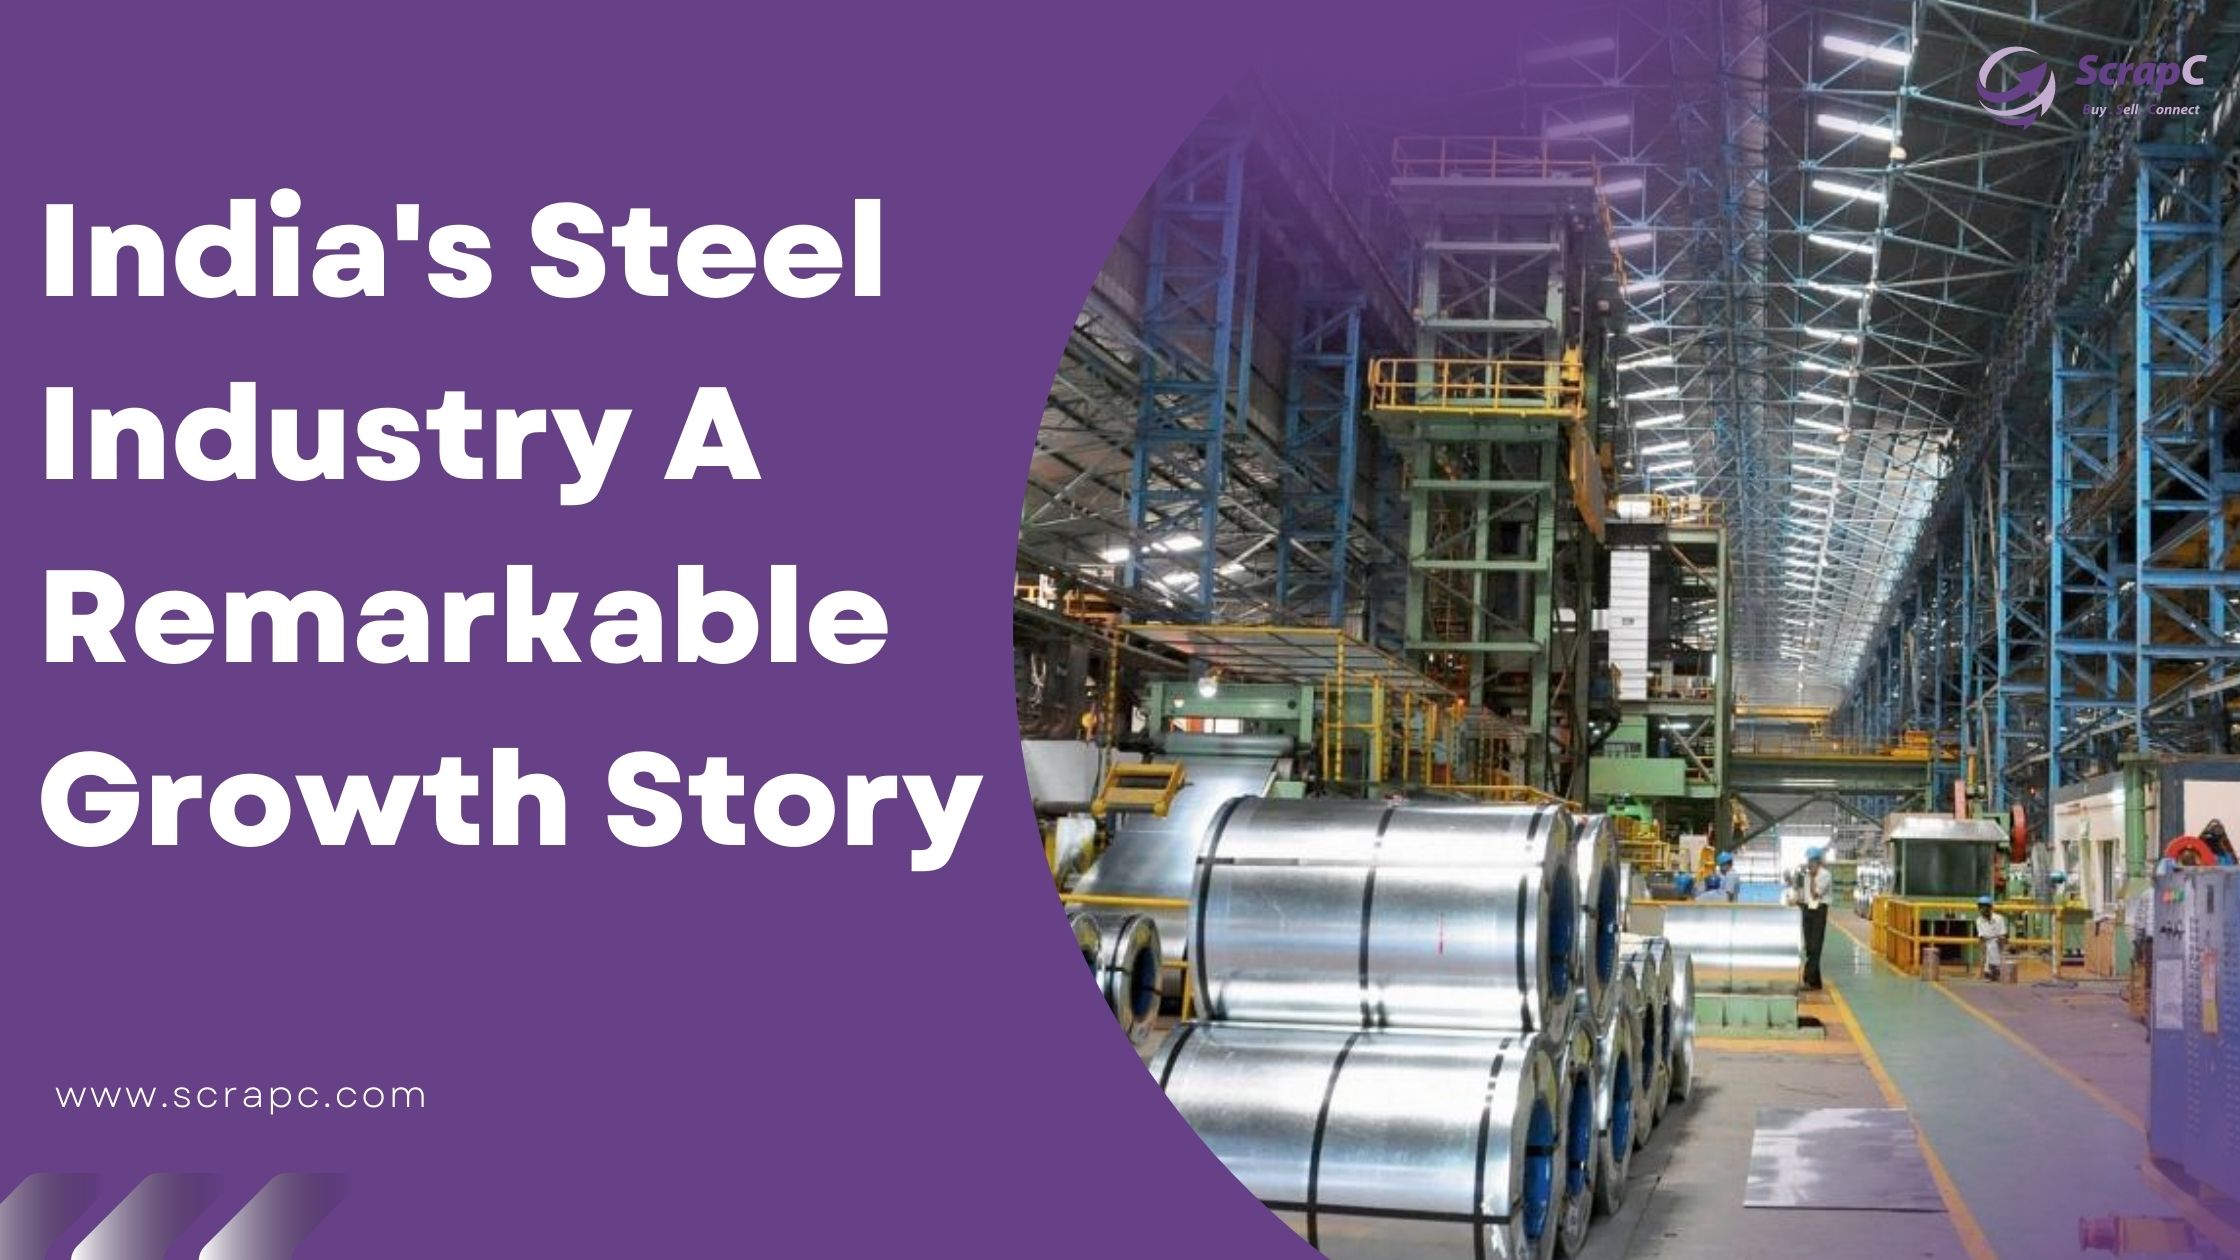 India's Steel Industry: A Remarkable Growth Story